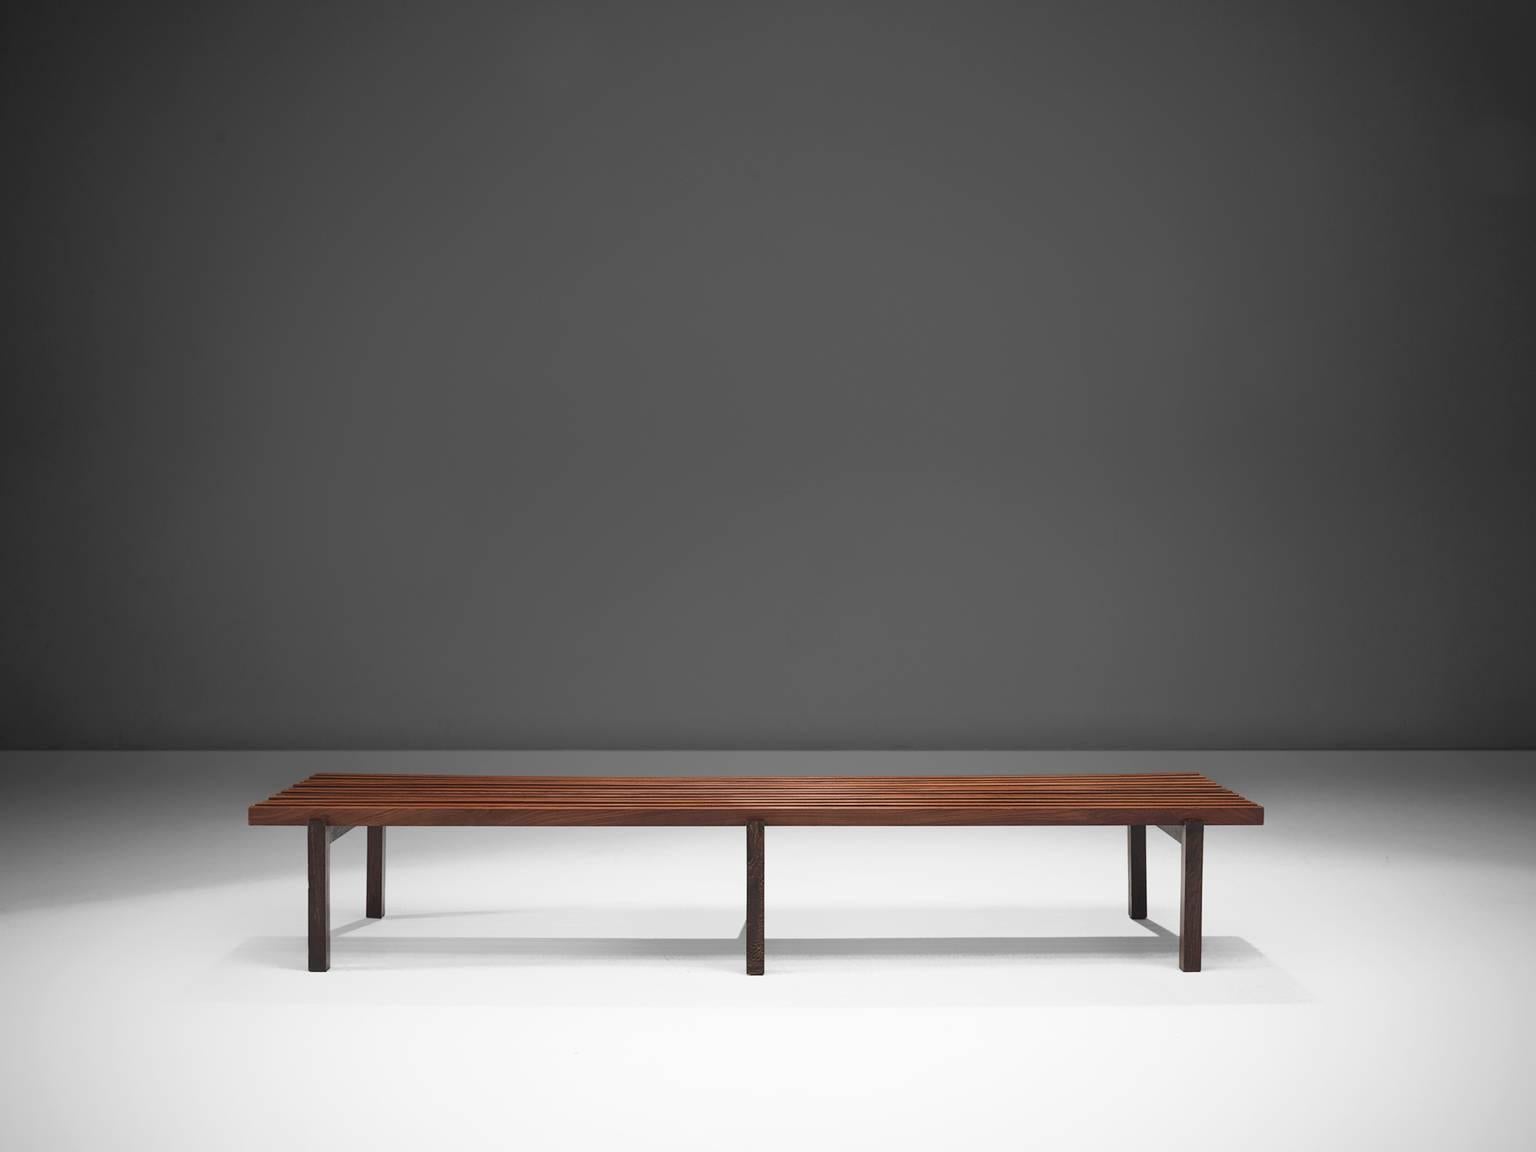 Midcentury Slat Bench in Wenge Wood and Stained Ash (Asche)